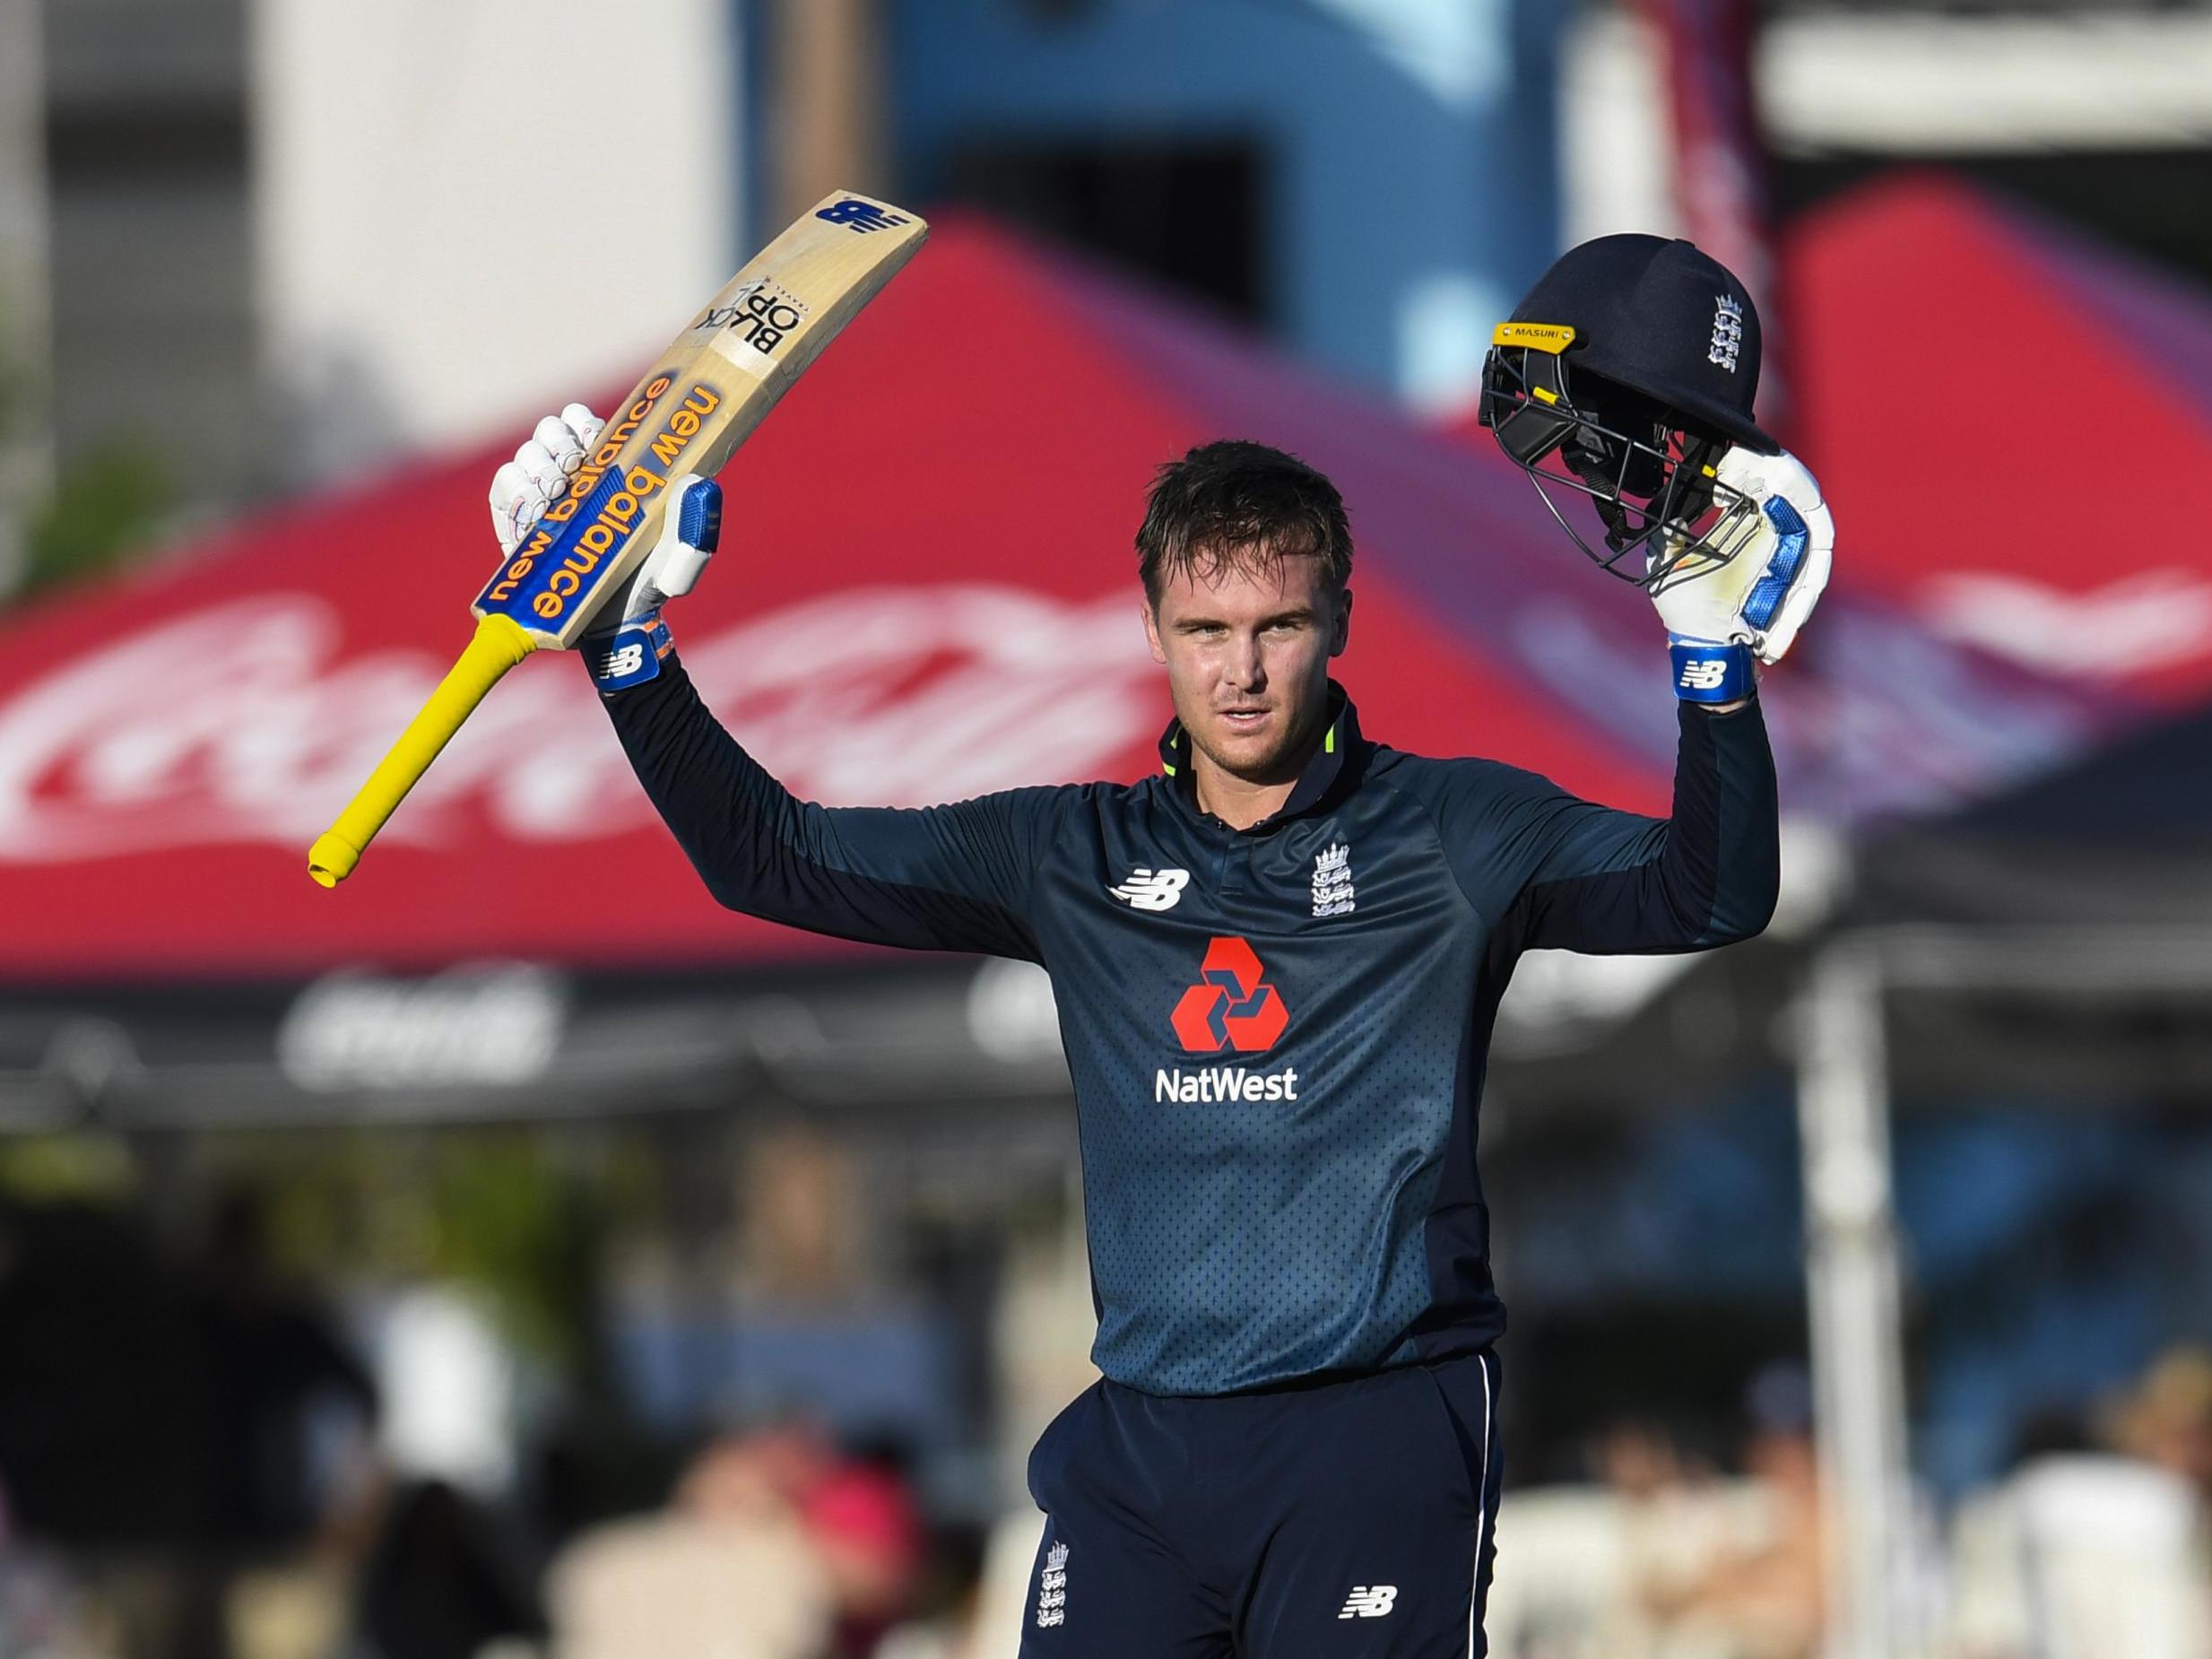 Jason Roy is hoping ODI success can translate to an Ashes opportunity